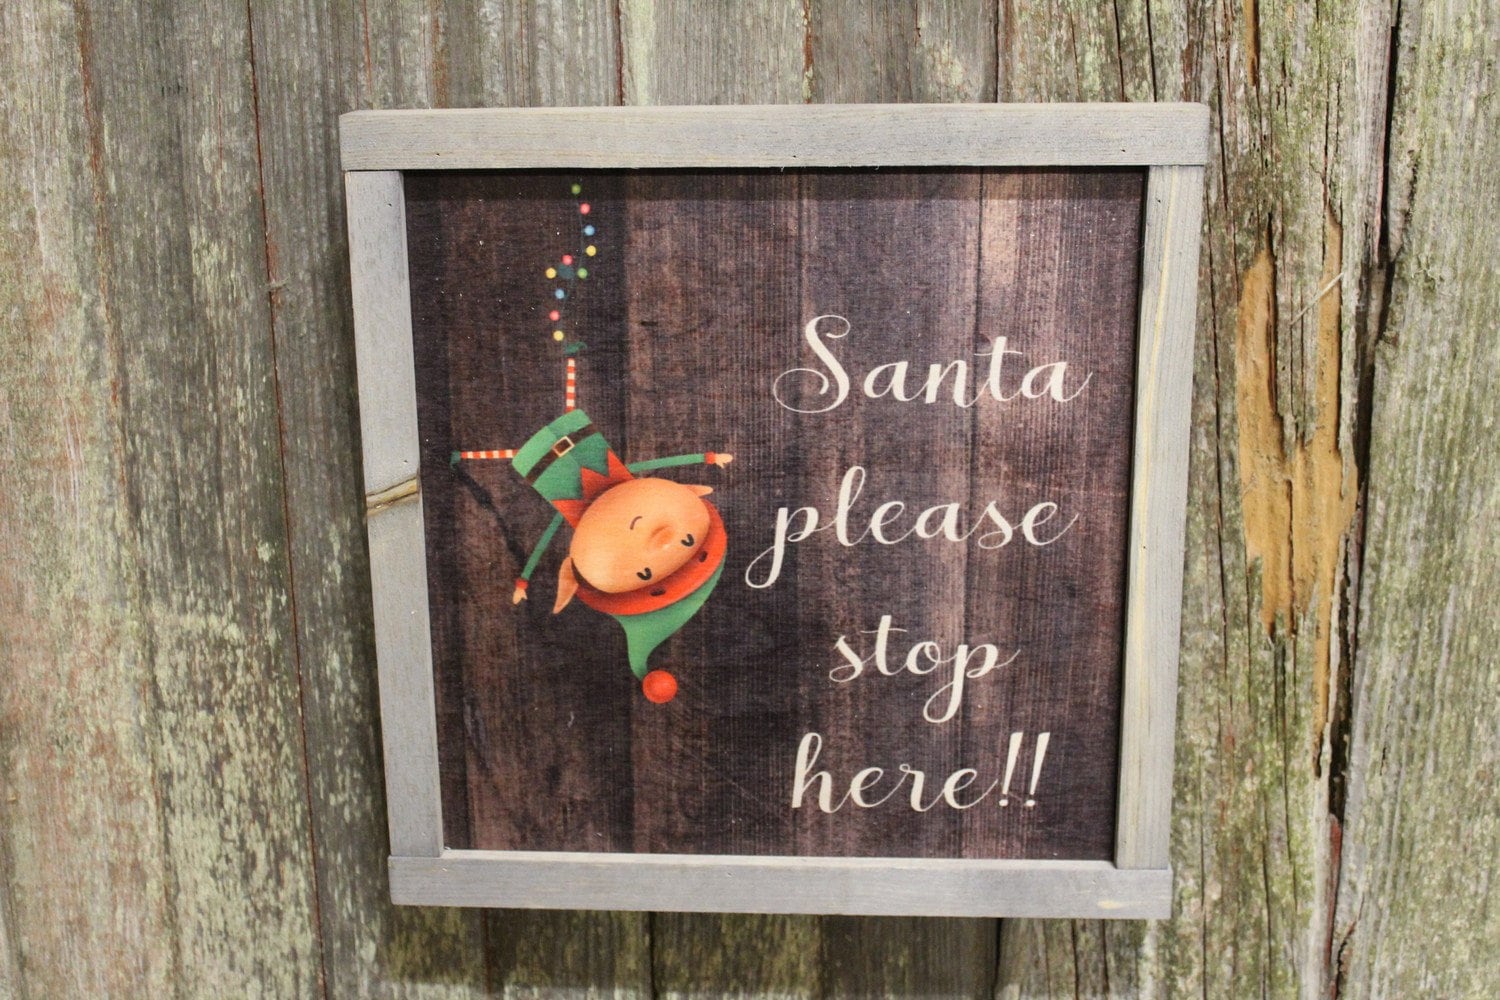 Santa Please Stop Here! Wood Sign Hanging Silly Upside Down Elf Christmas Décor Pallet Sign Framed Rustic Primitive Printed Wall Art